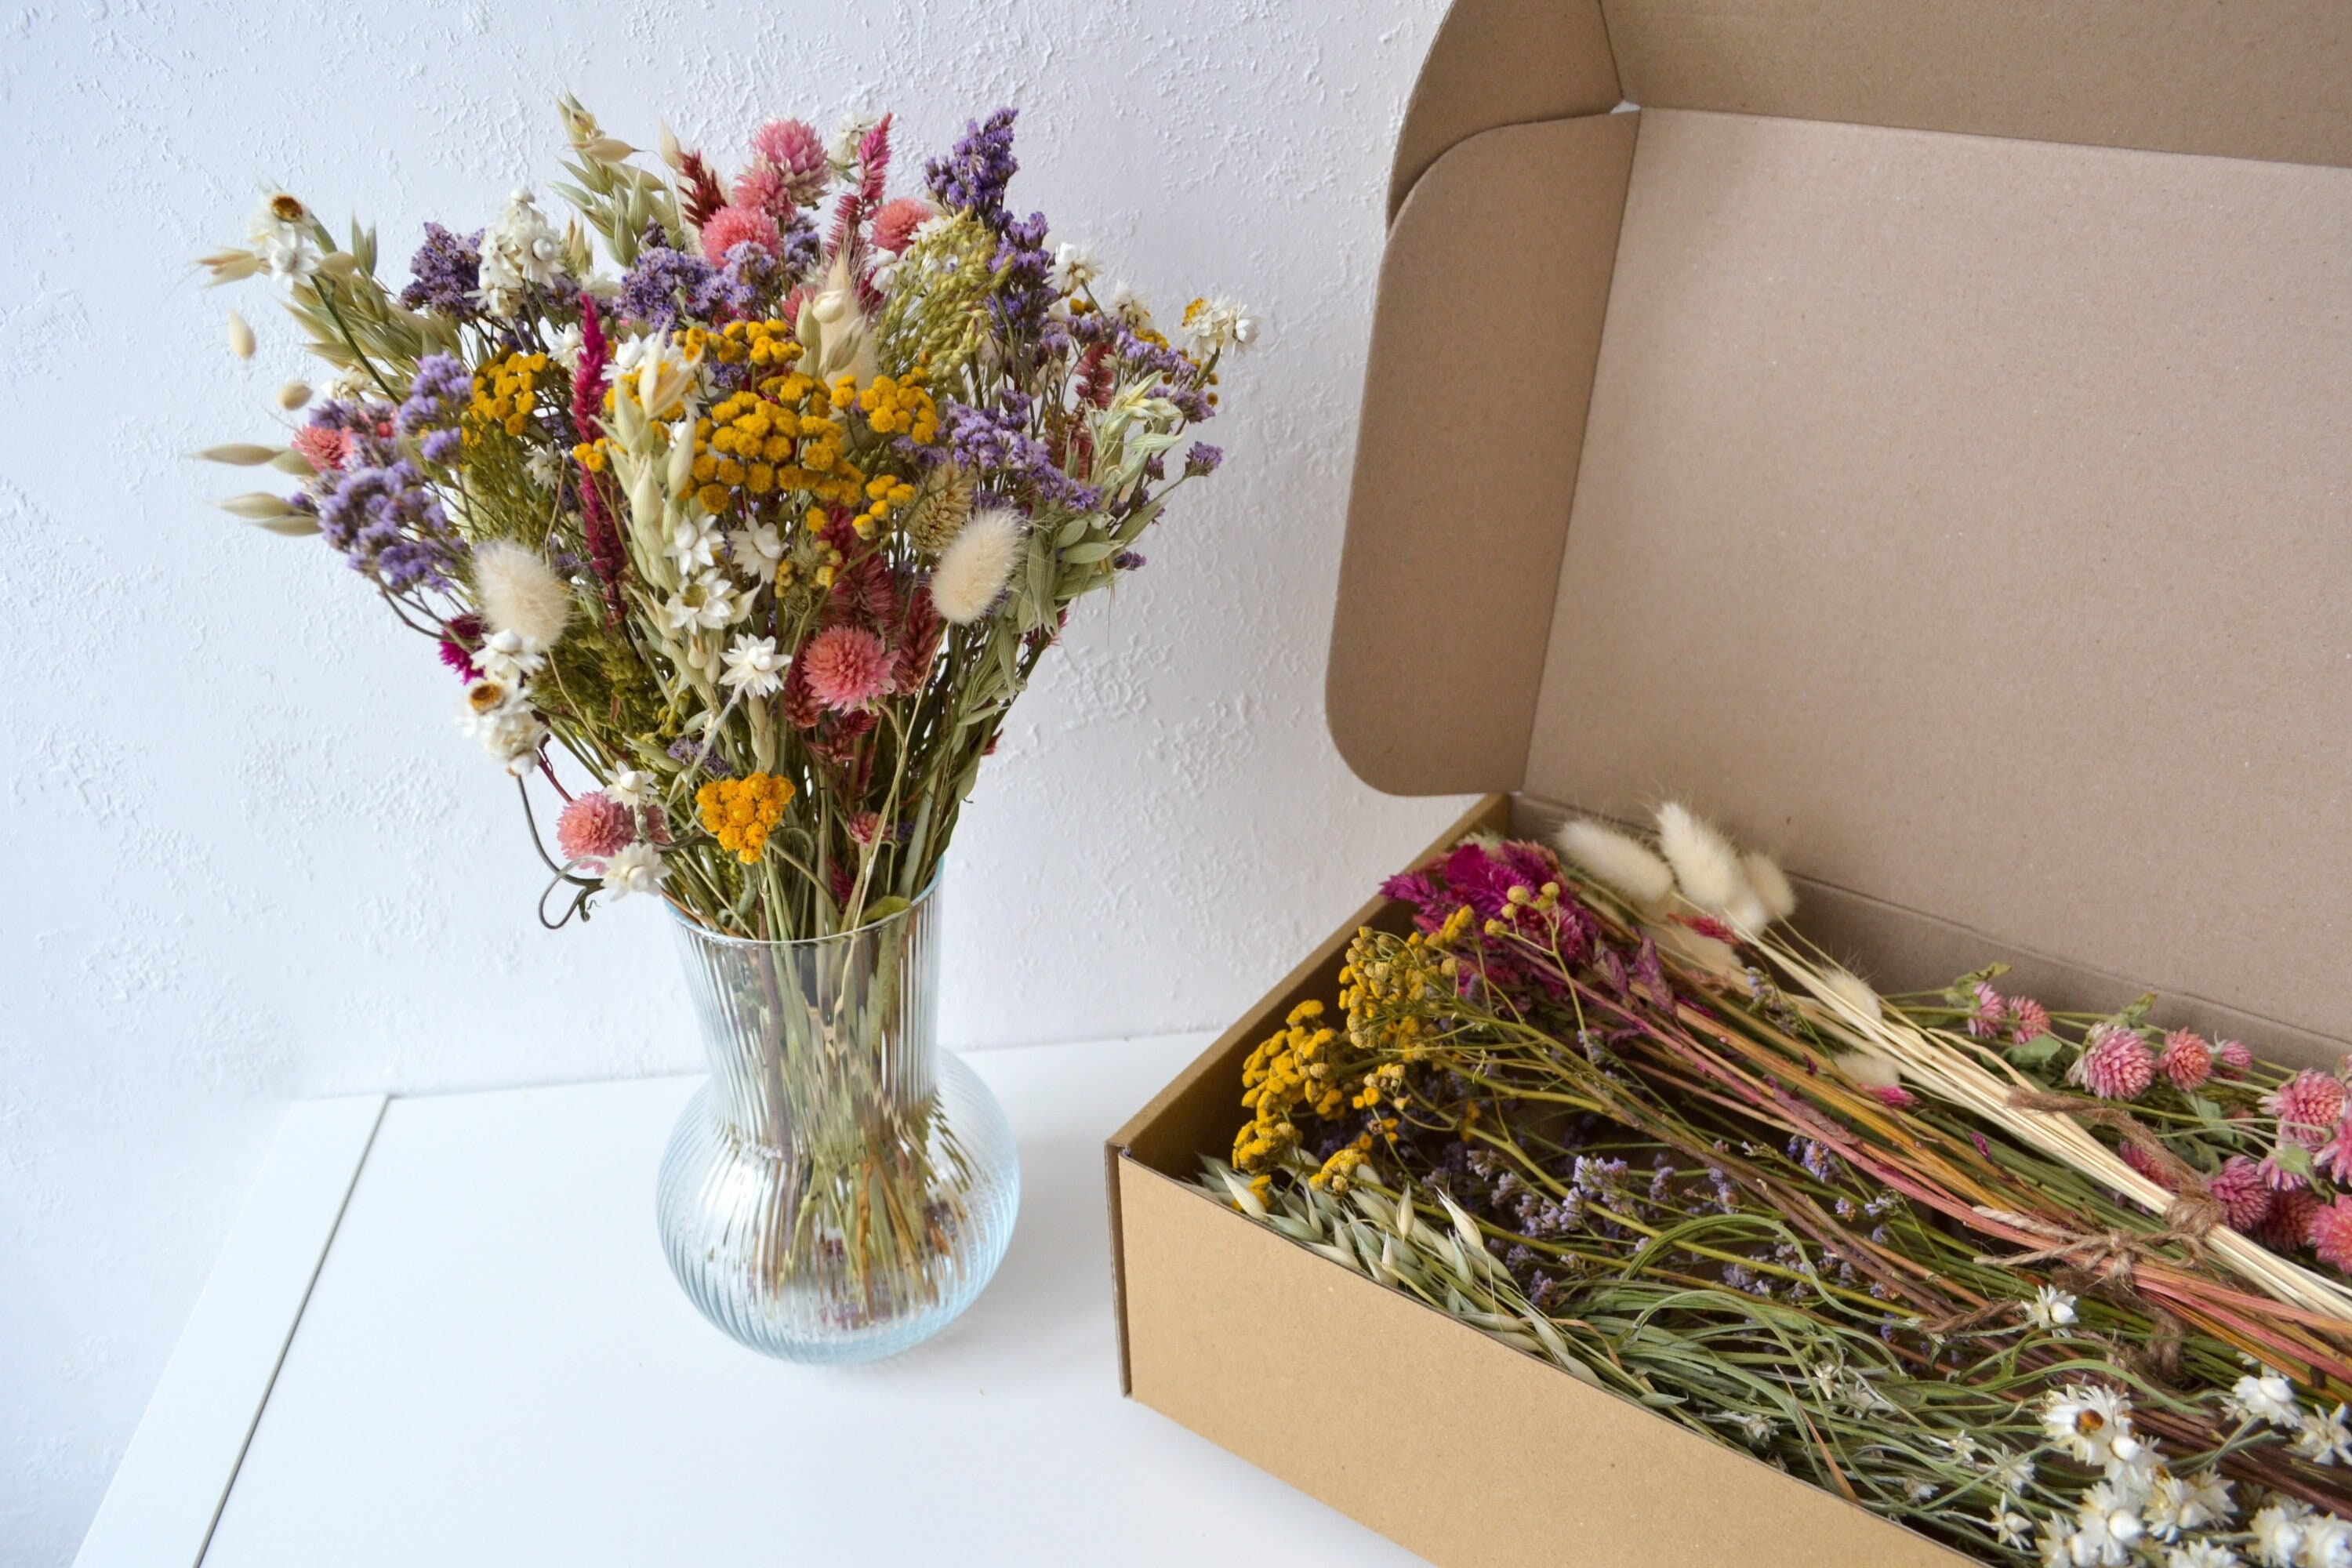 Botanical Heirloom Flower Press Kit, Dried Flowers, Fall Leaves, Preserving  Plants and Flowers 